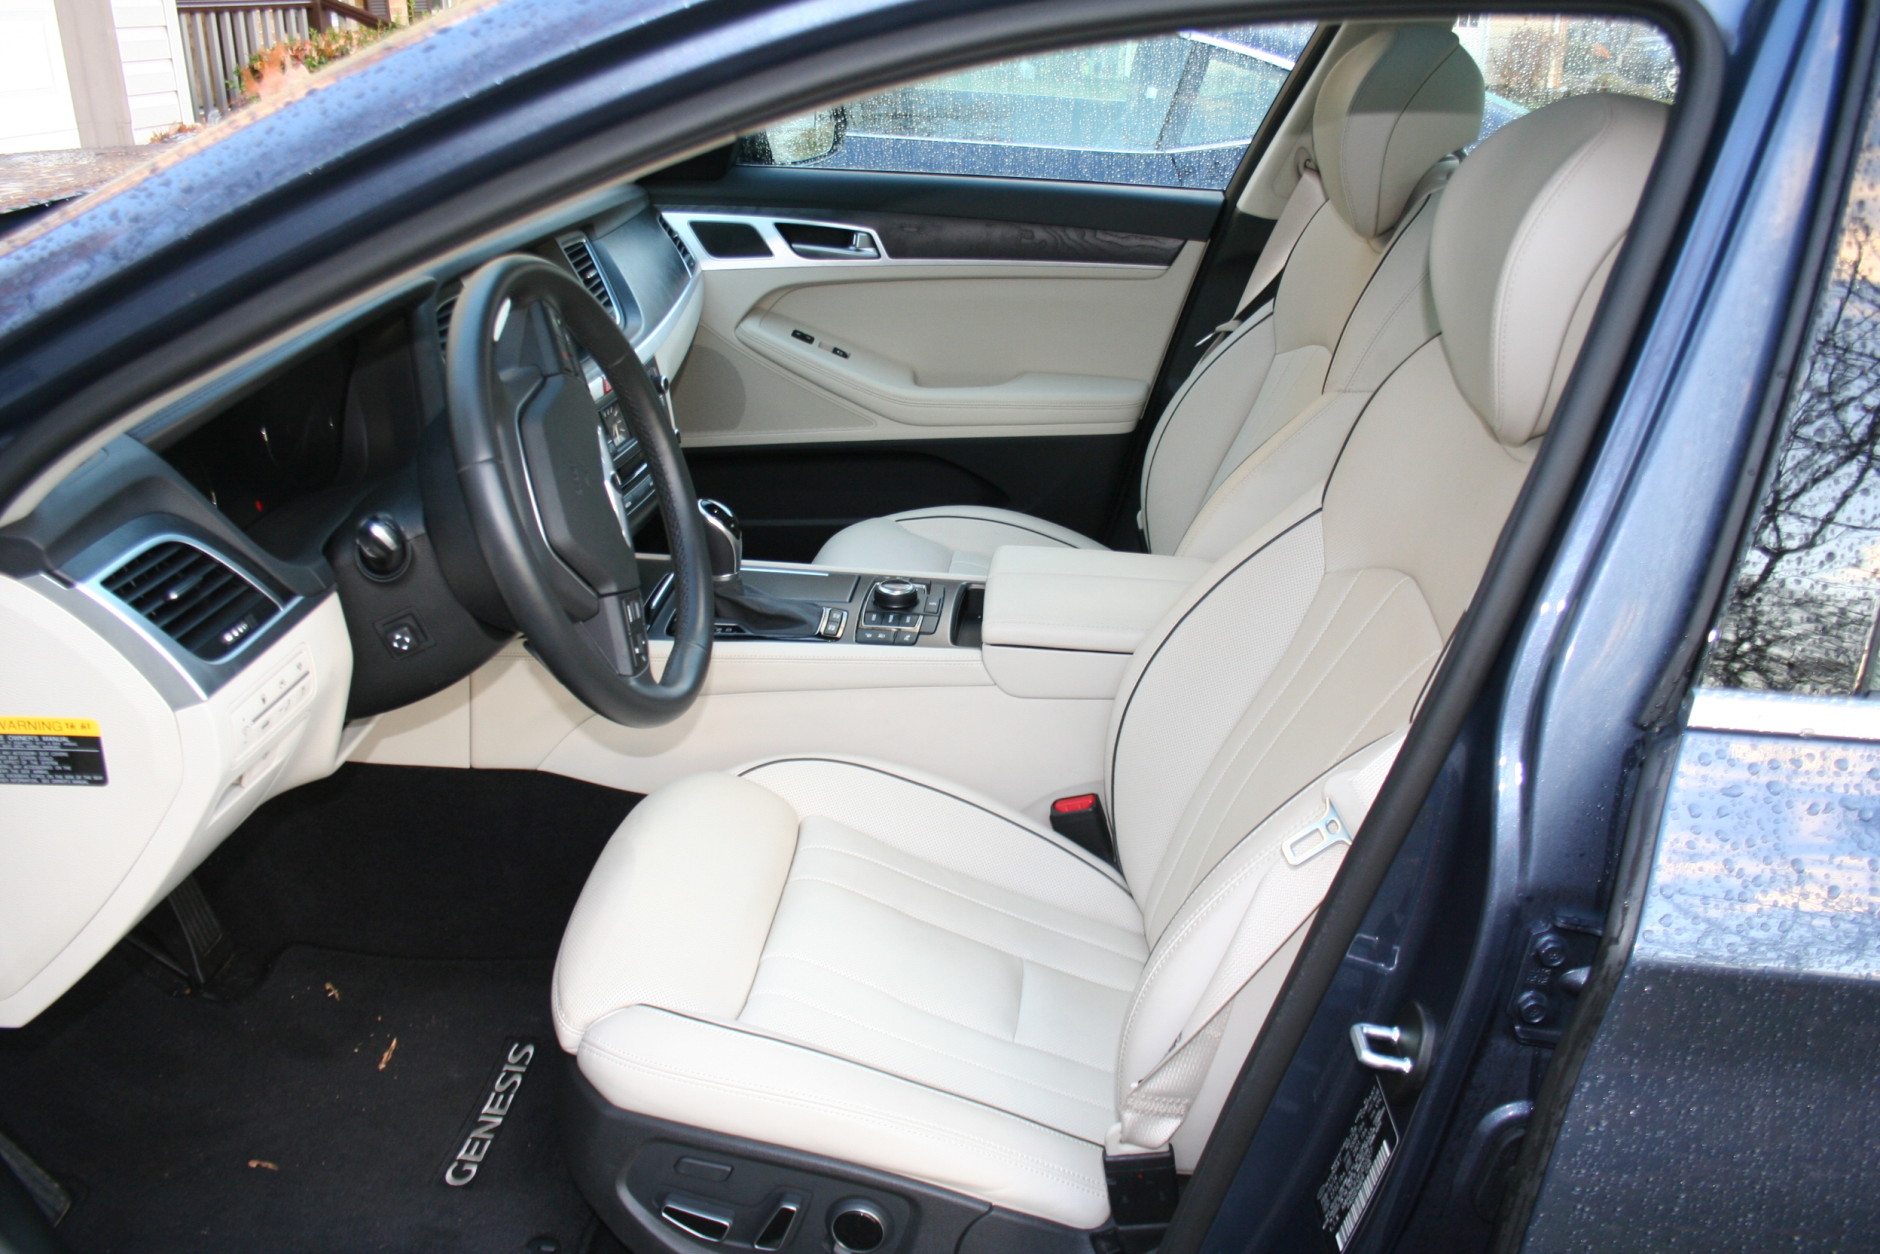 There's a good amount of space both upfront and in the back seats. The front seats are very comfortable with nice quality leather. (WTOP/Mike Parris)